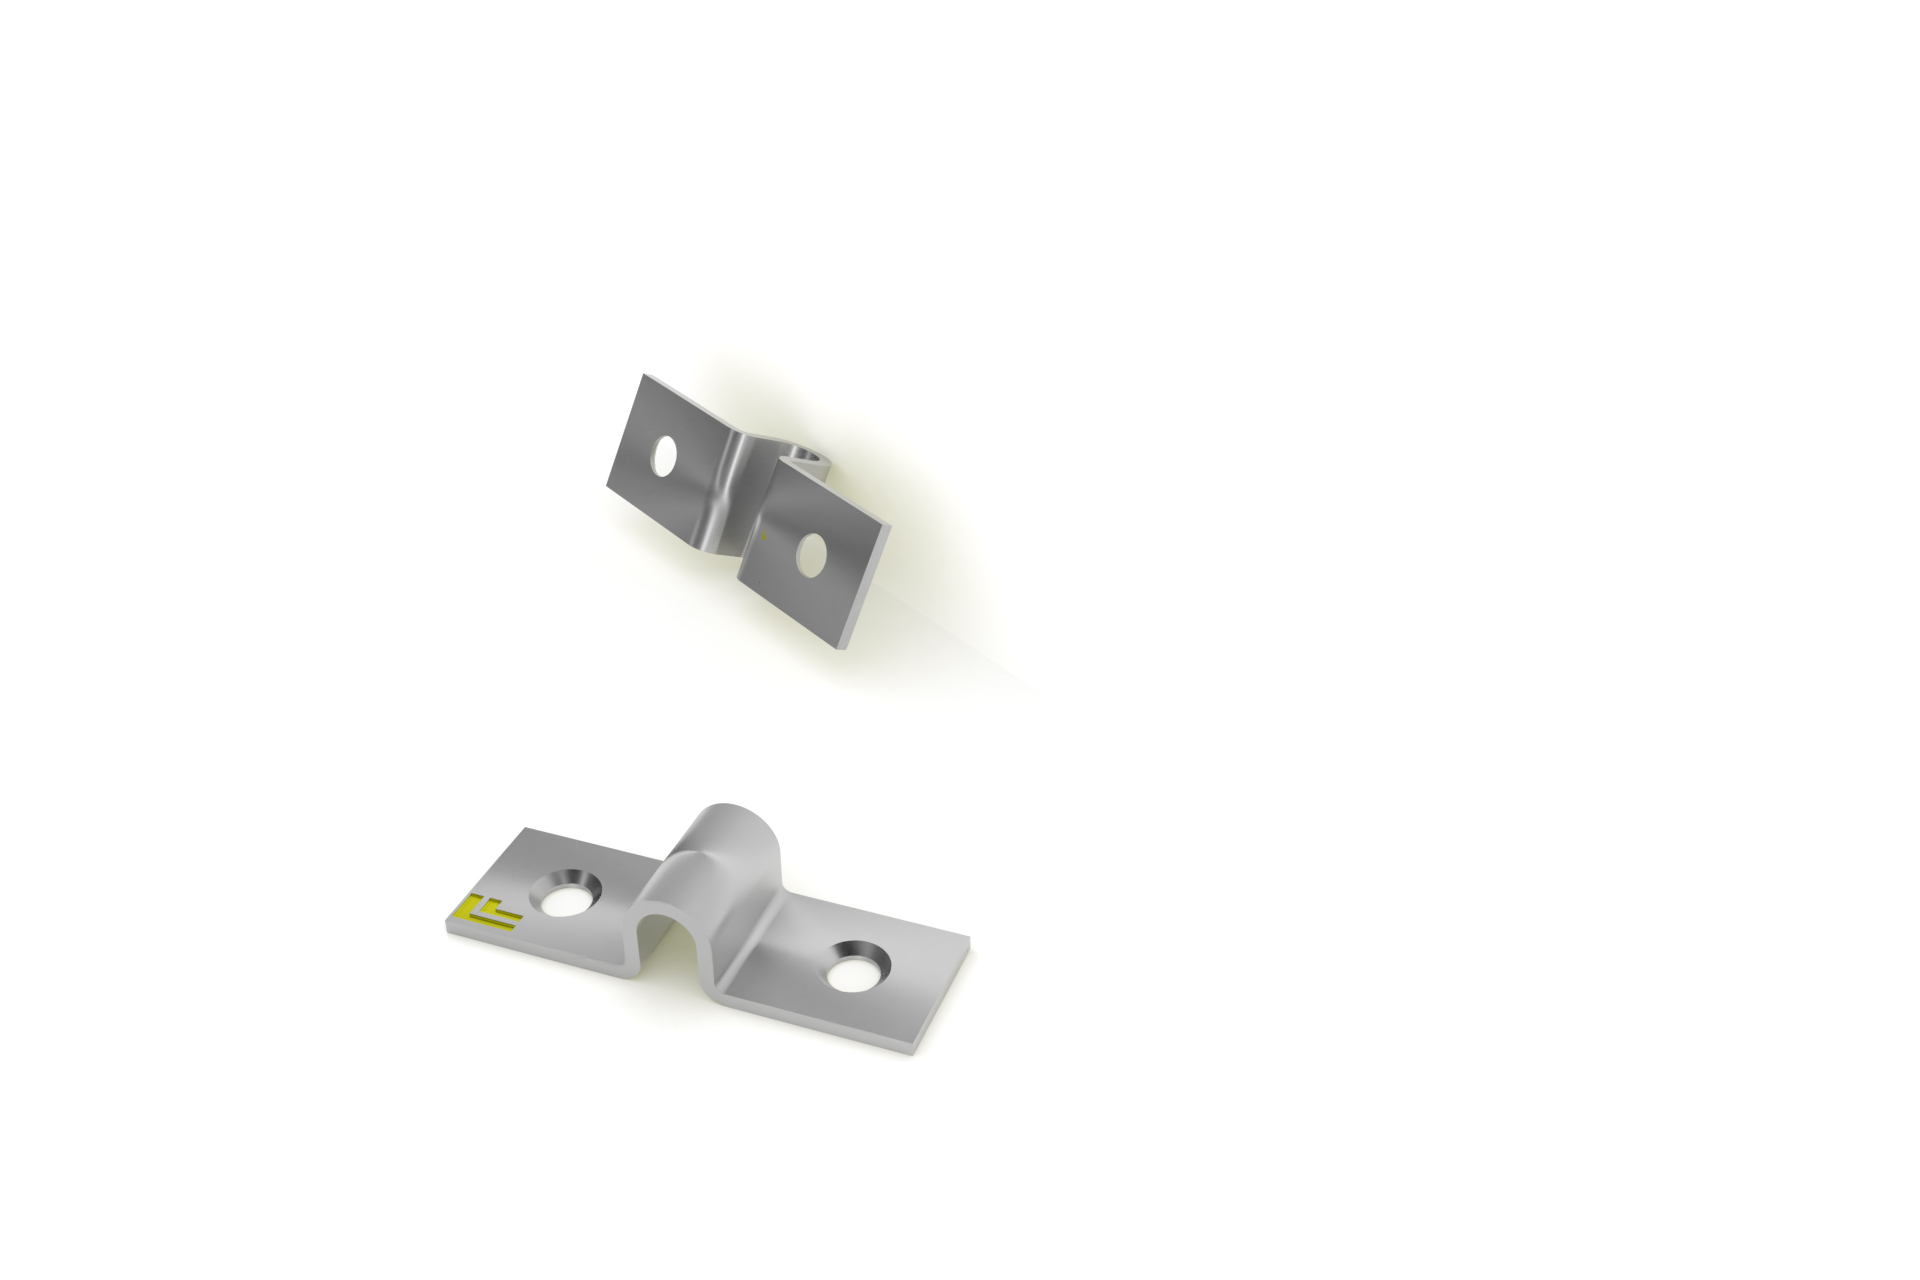 EDGE CLIP FC006, hole 5 mm, stainless steel 1.4301 (AISI 304)